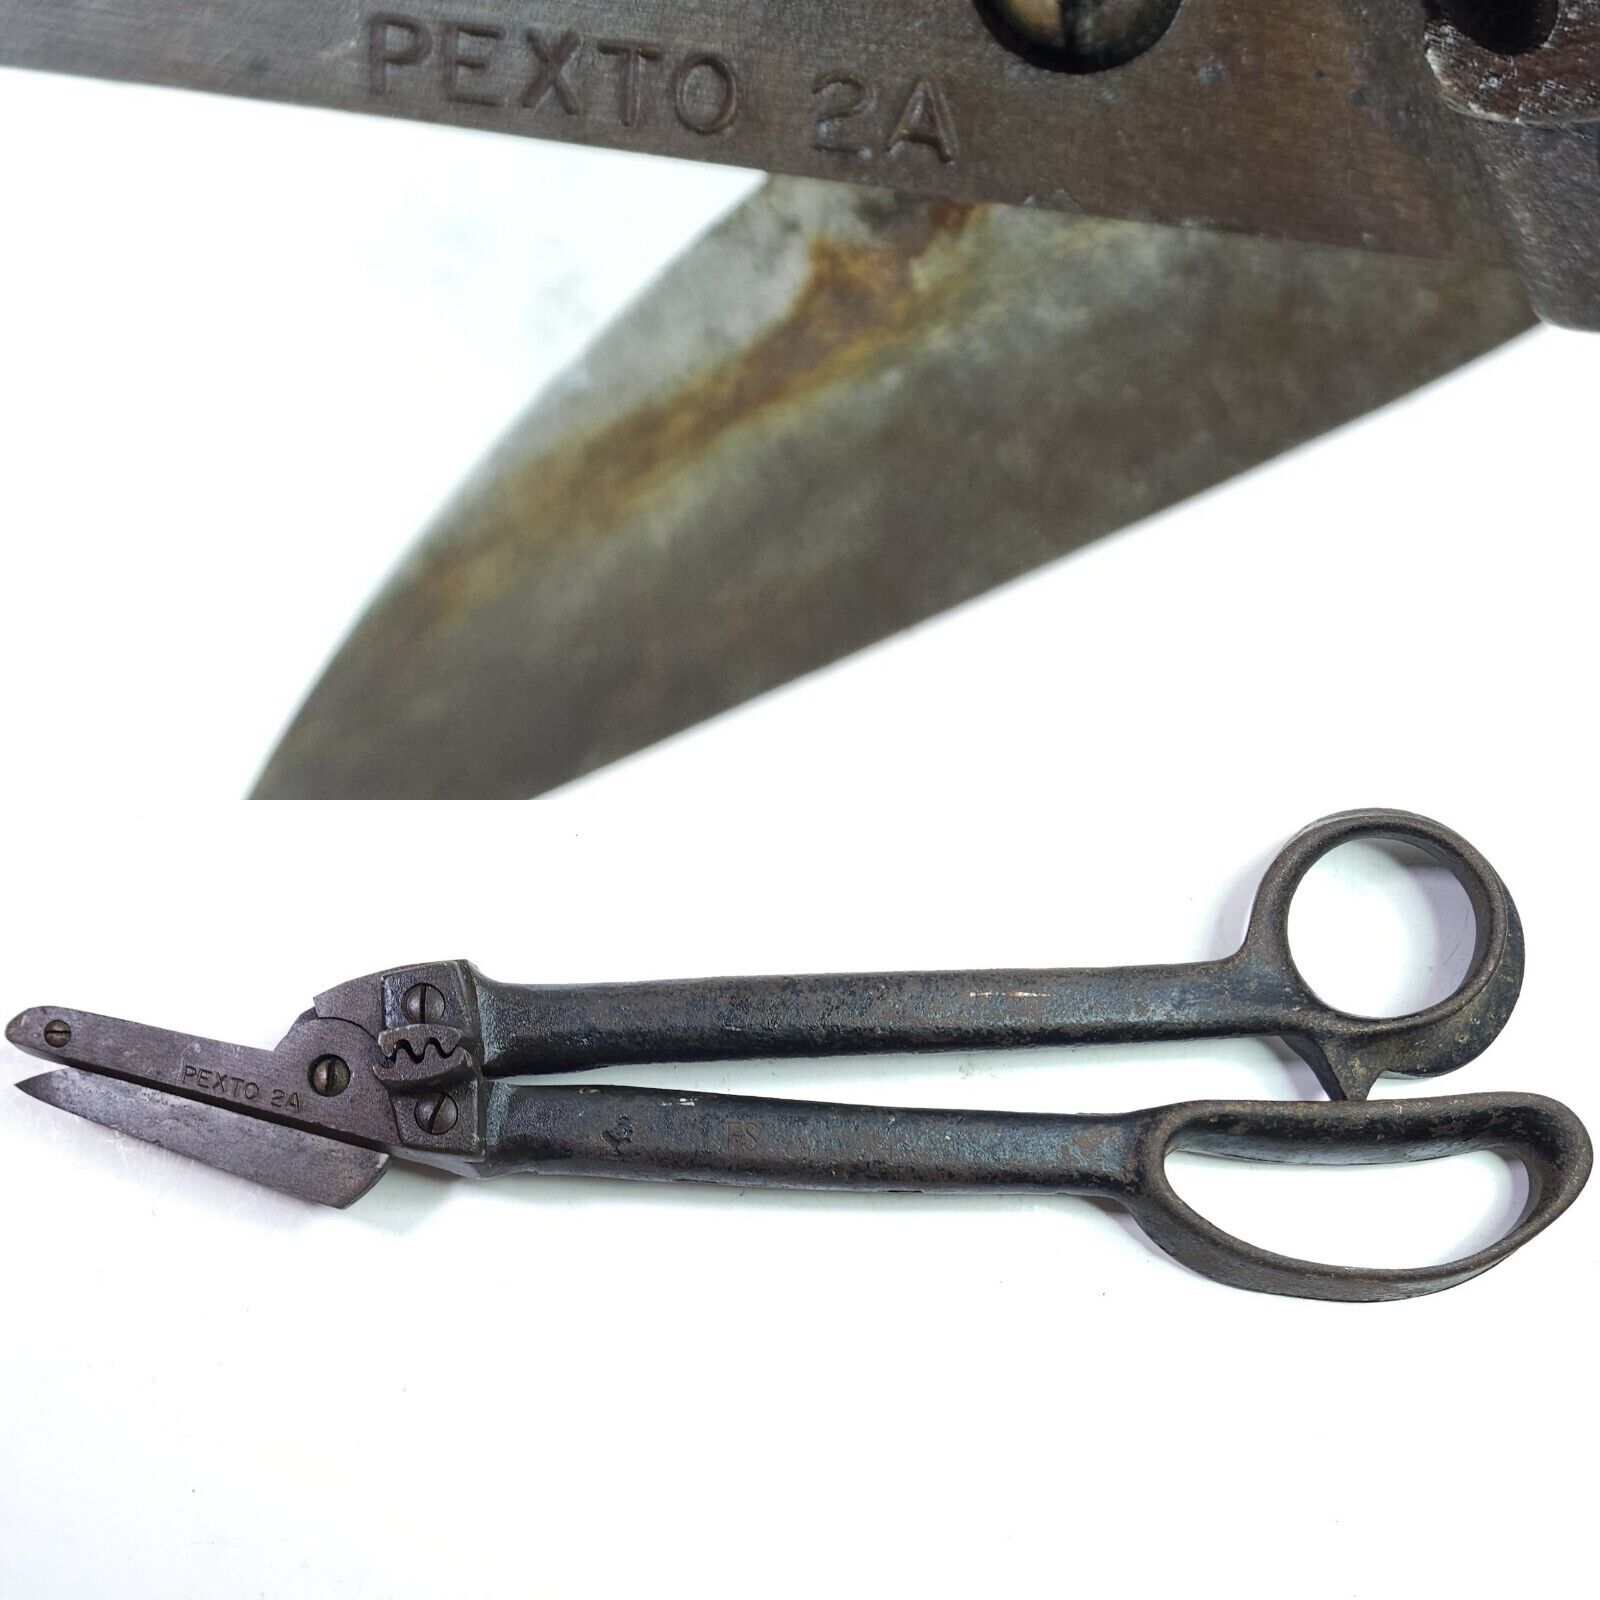 VTG PEXTO No. 2-A Sheet Metal Shears Snips Crimpers Metalworking Stove Pipe